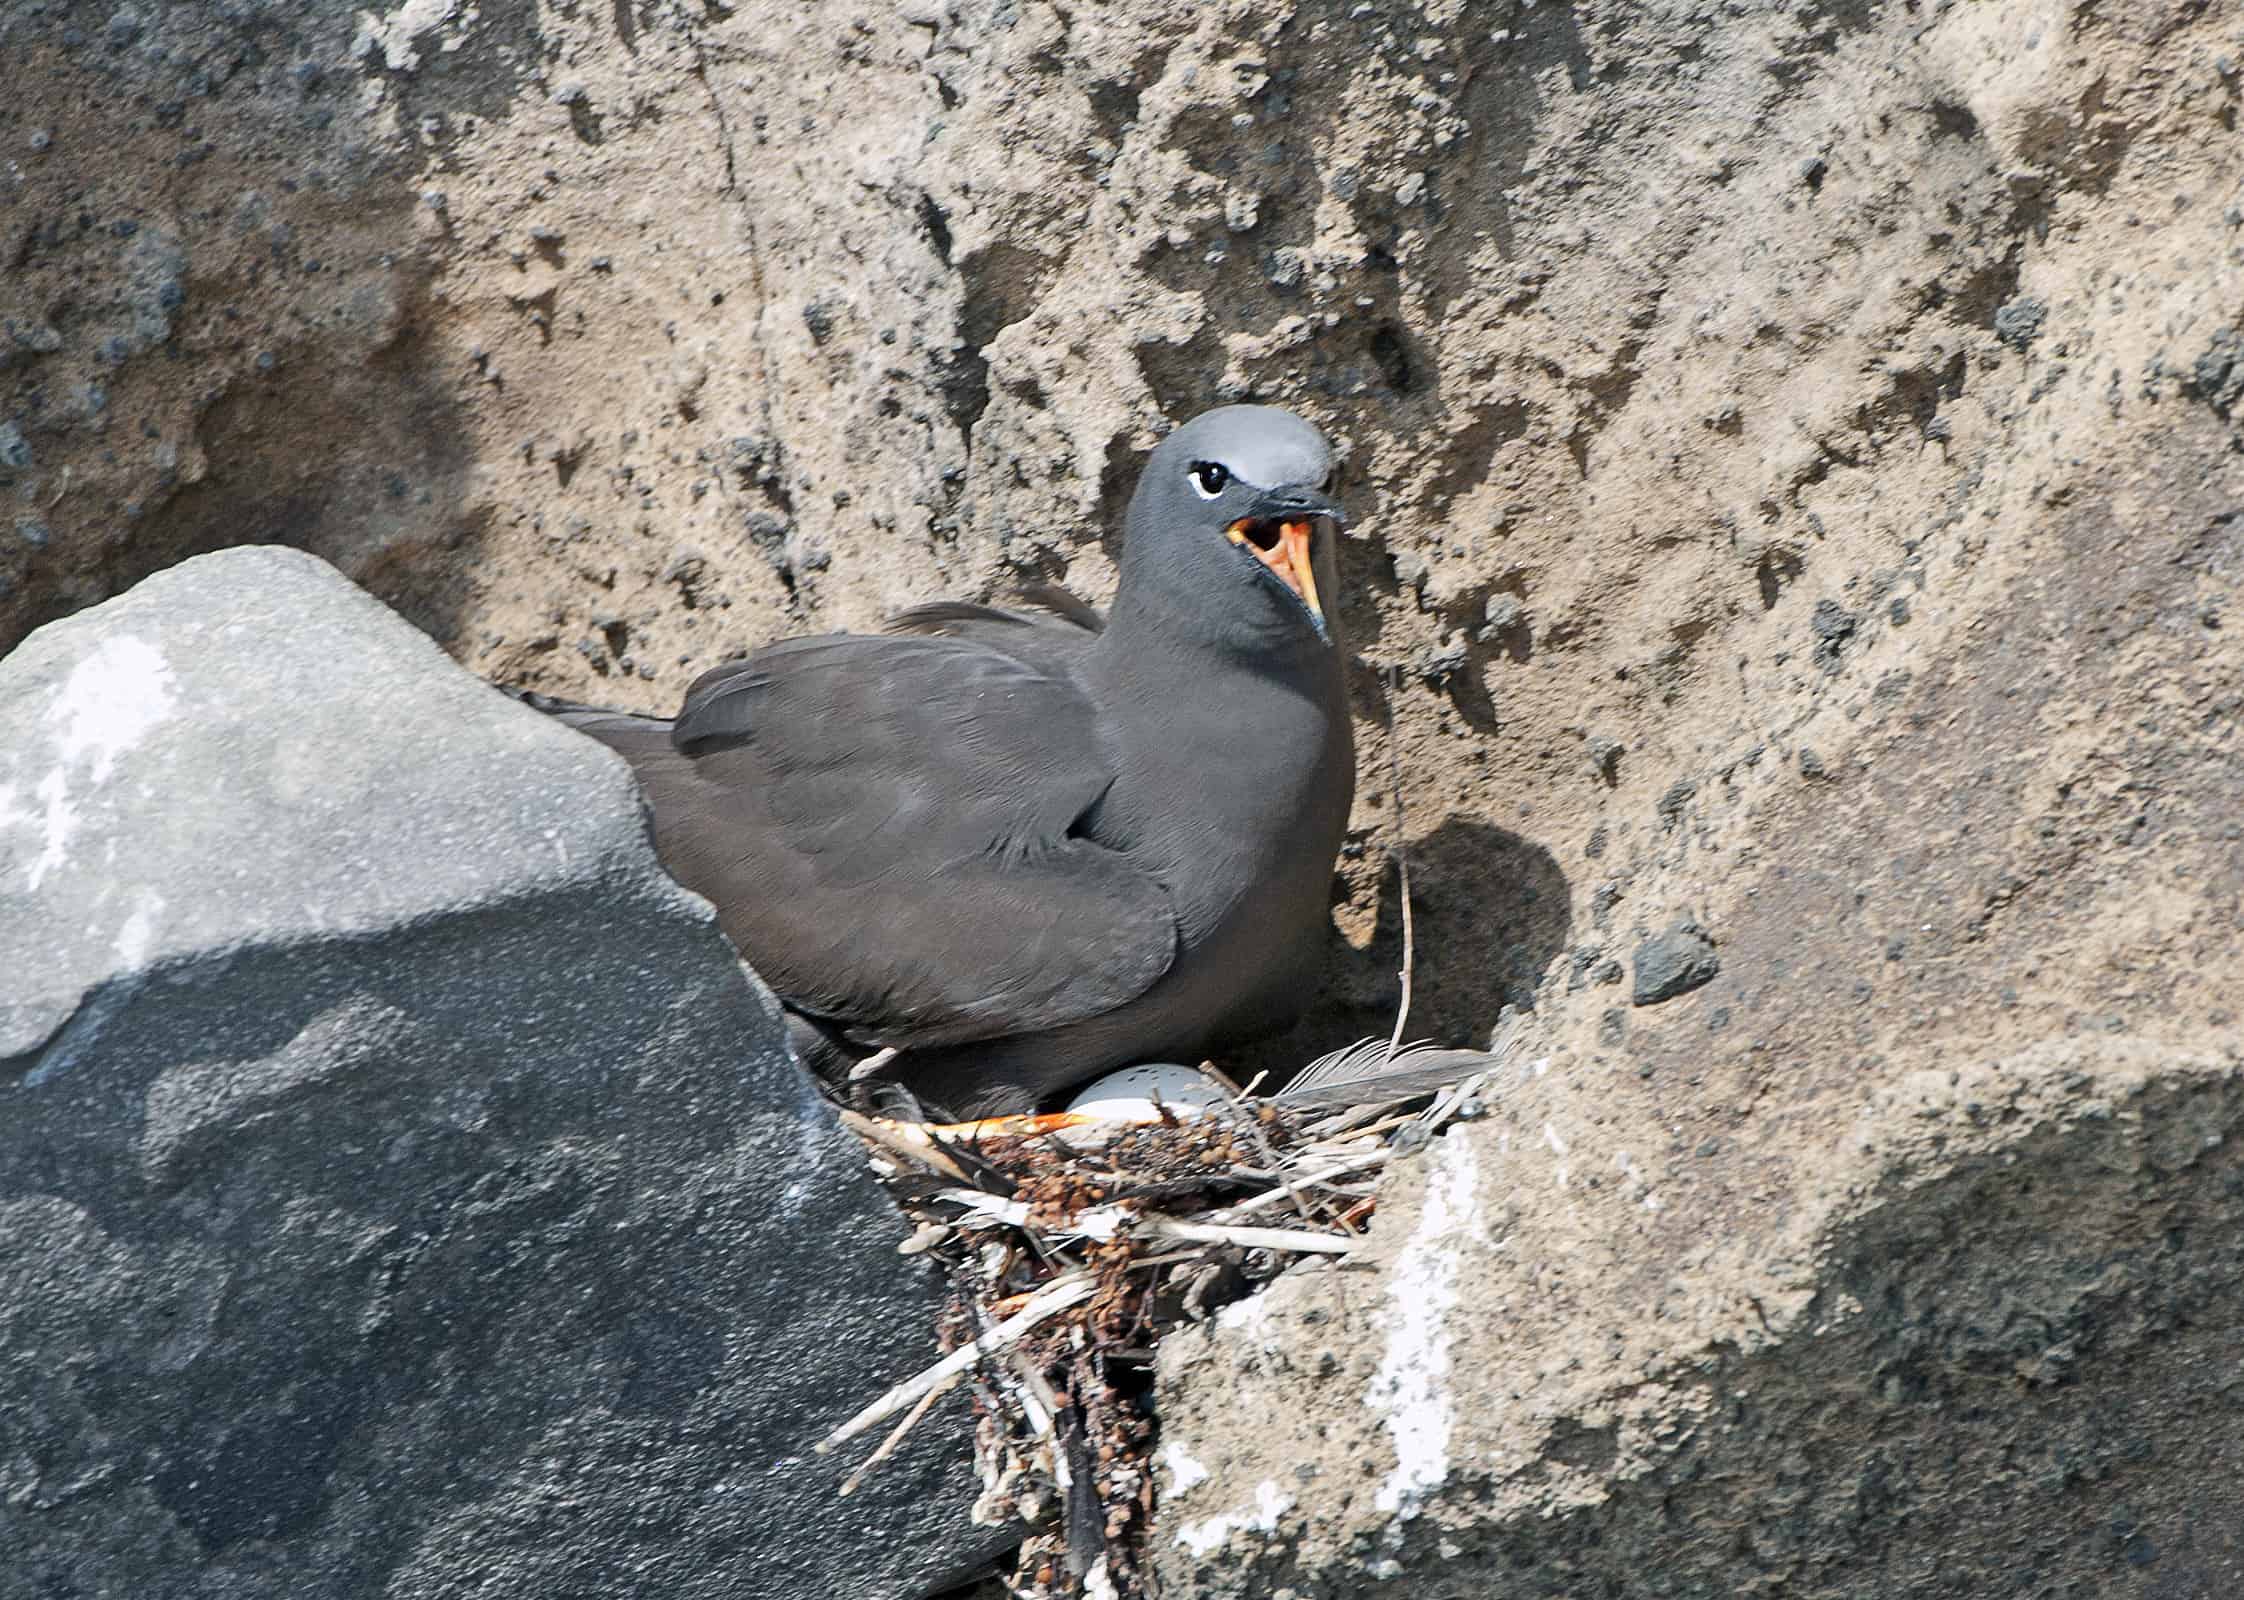 Clifftop nest for Brown Noddy tern, one of the fascinating animals of the Galapagos